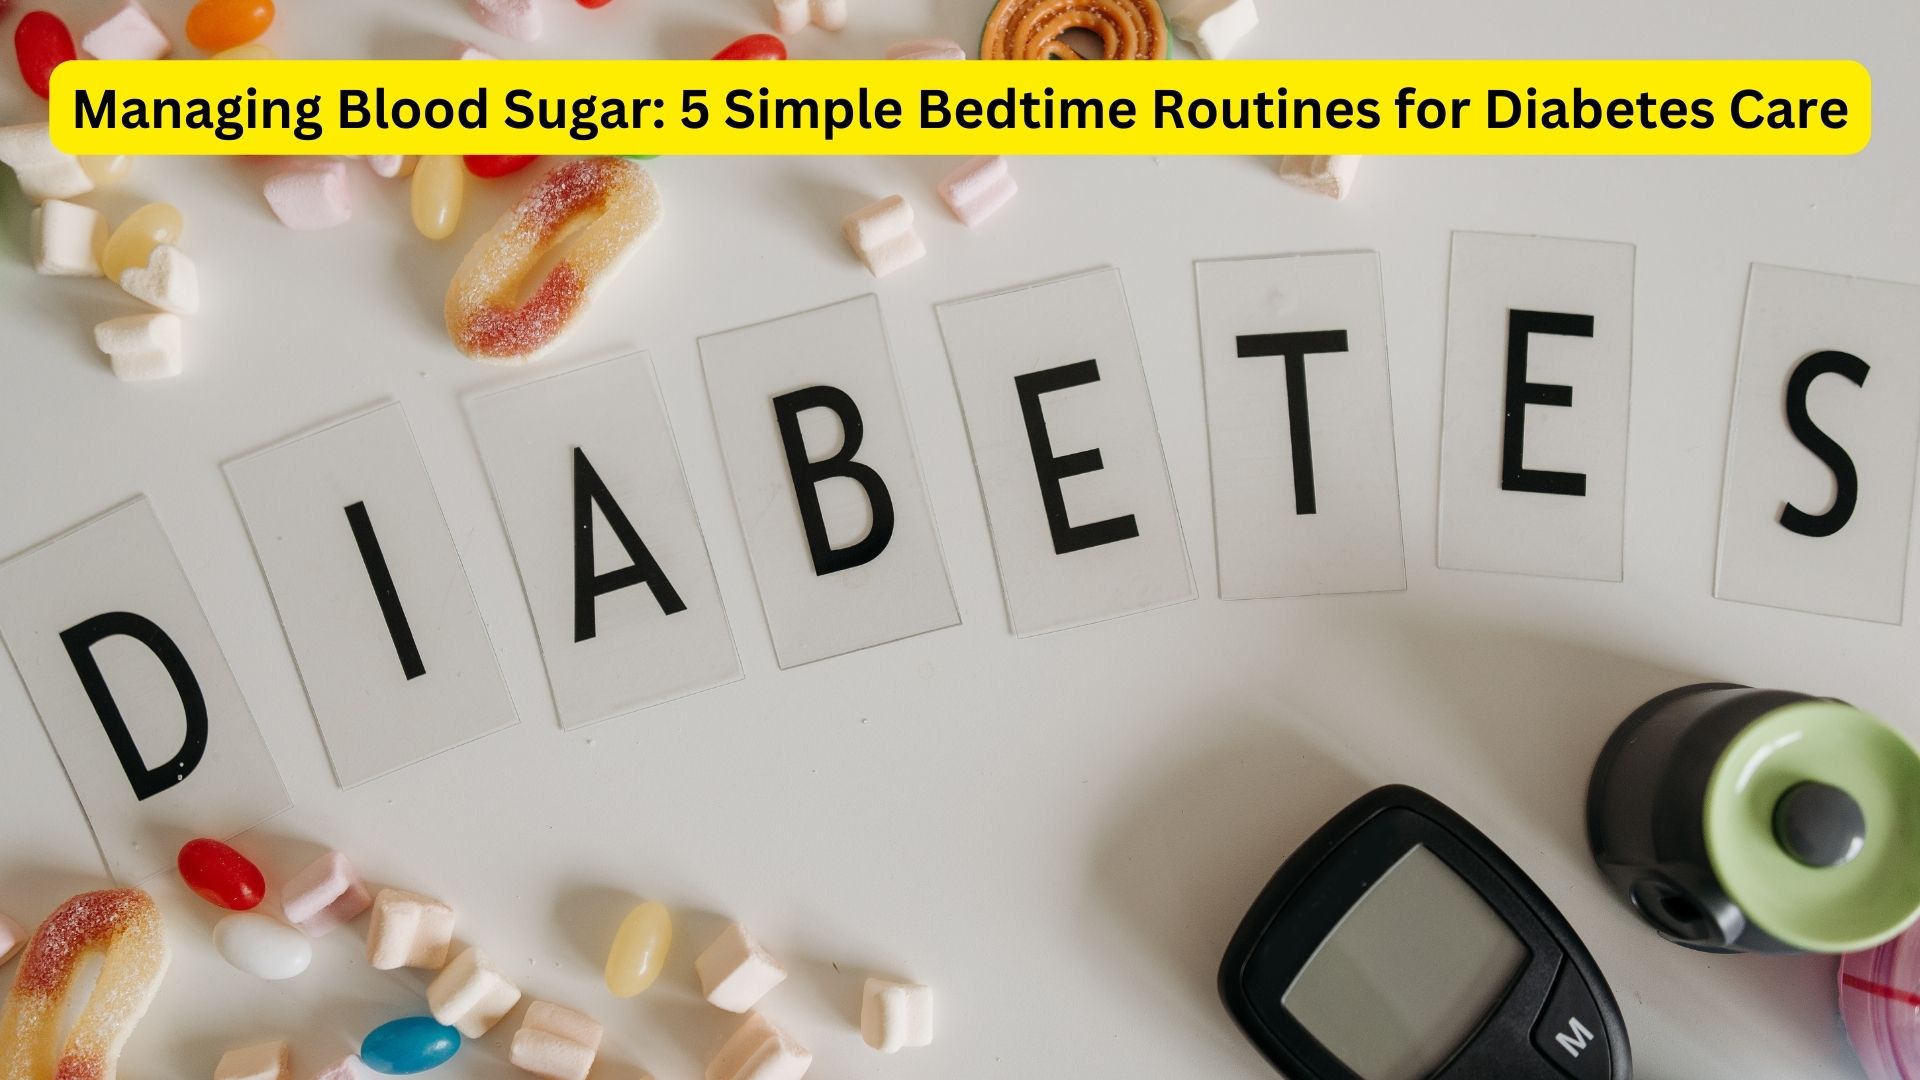 Managing Blood Sugar: 5 Simple Bedtime Routines for Diabetes Care